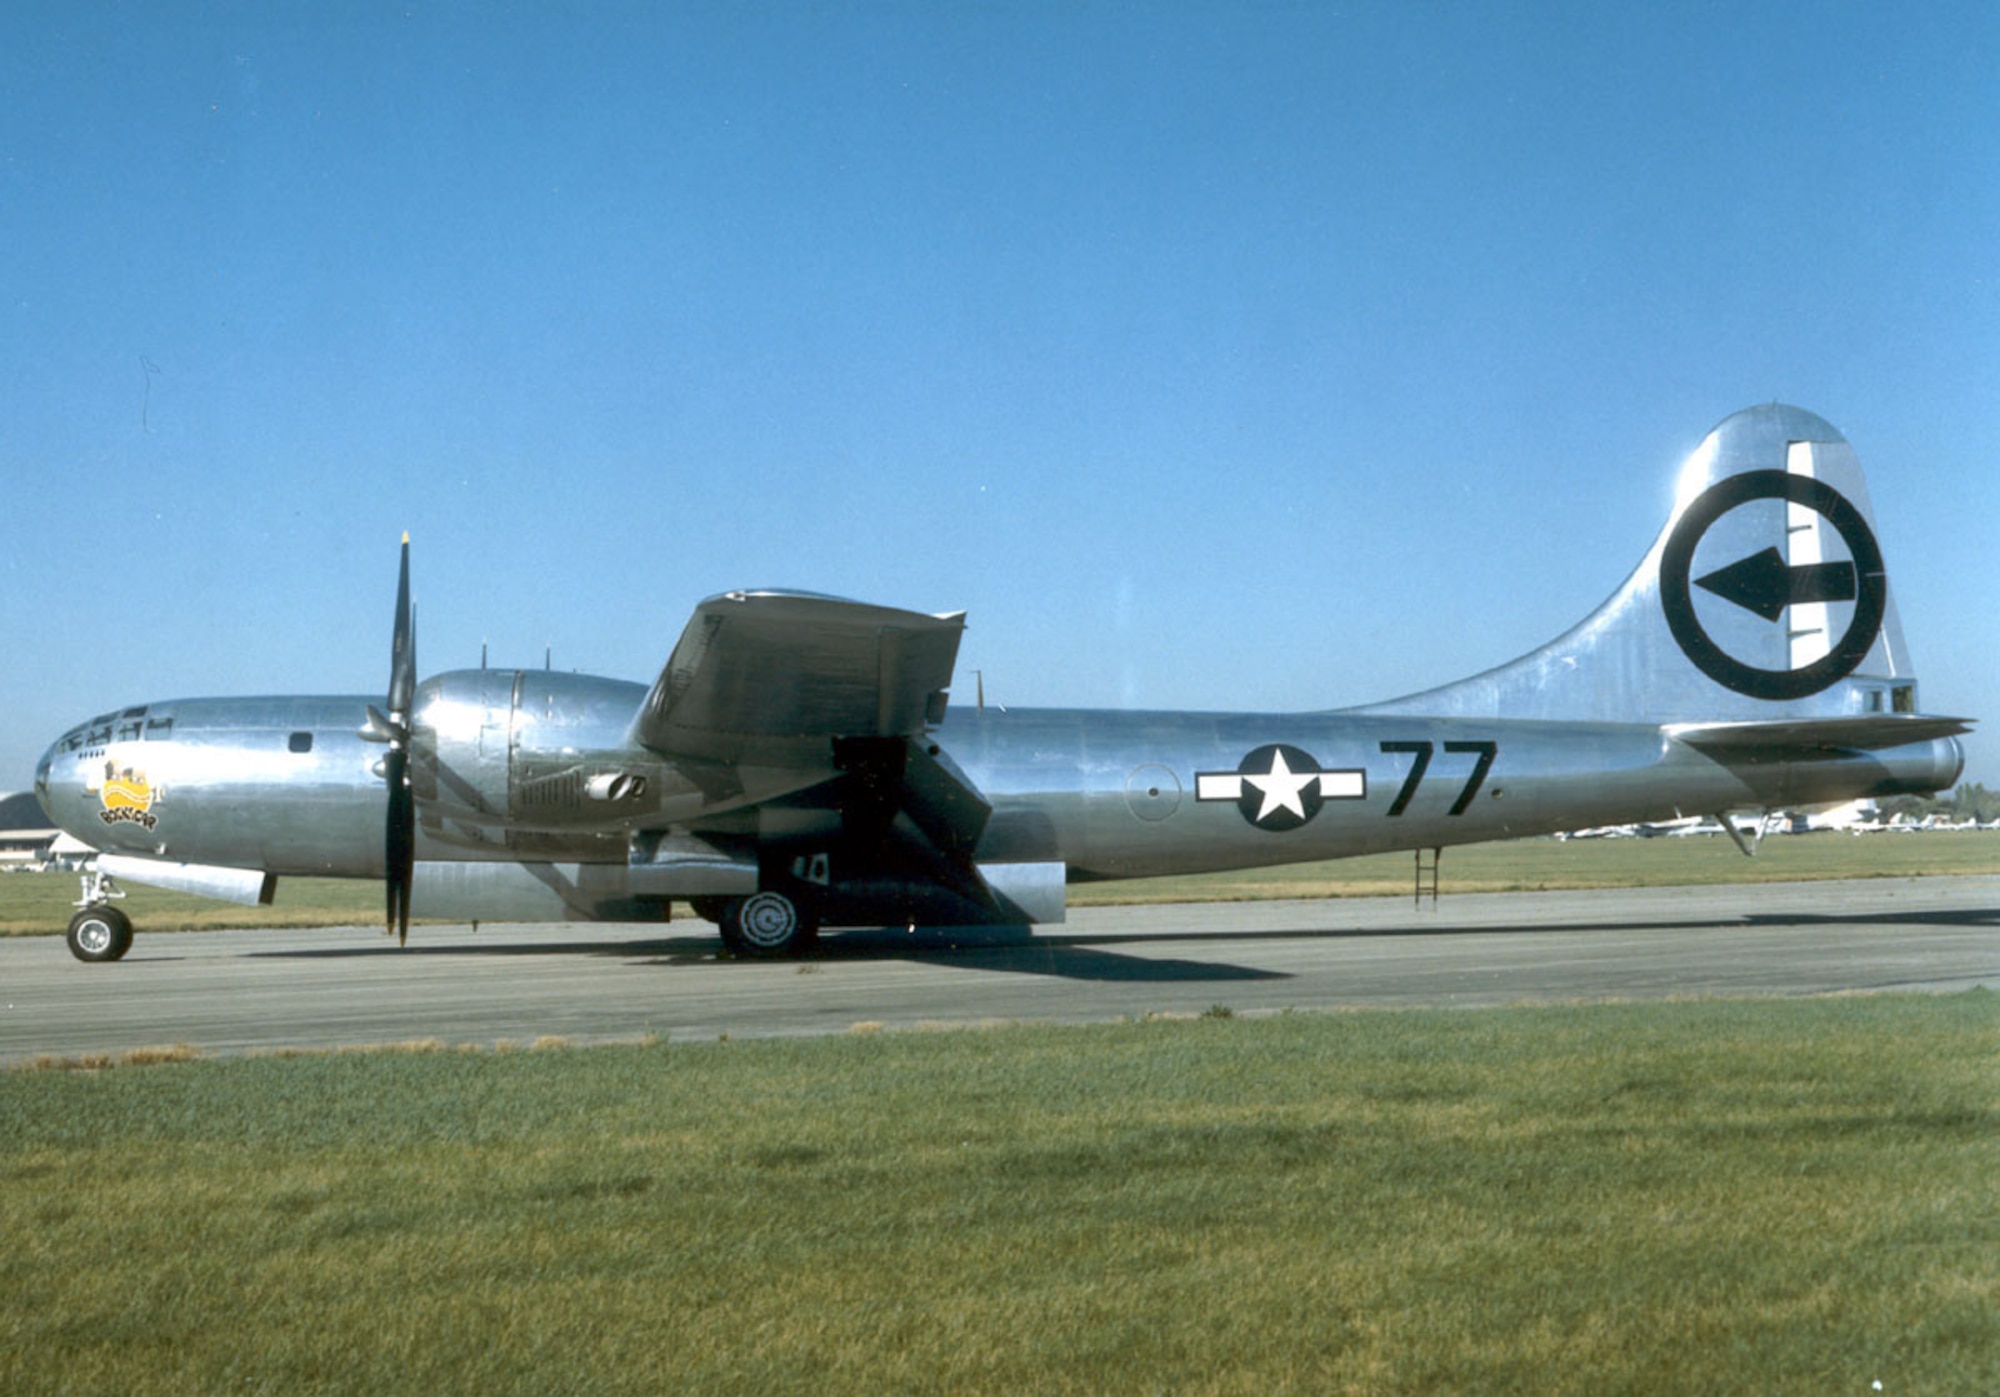 DAYTON, Ohio -- Boeing B-29 Superfortress "Bockscar" at the National Museum of the United States Air Force. (U.S. Air Force photo)